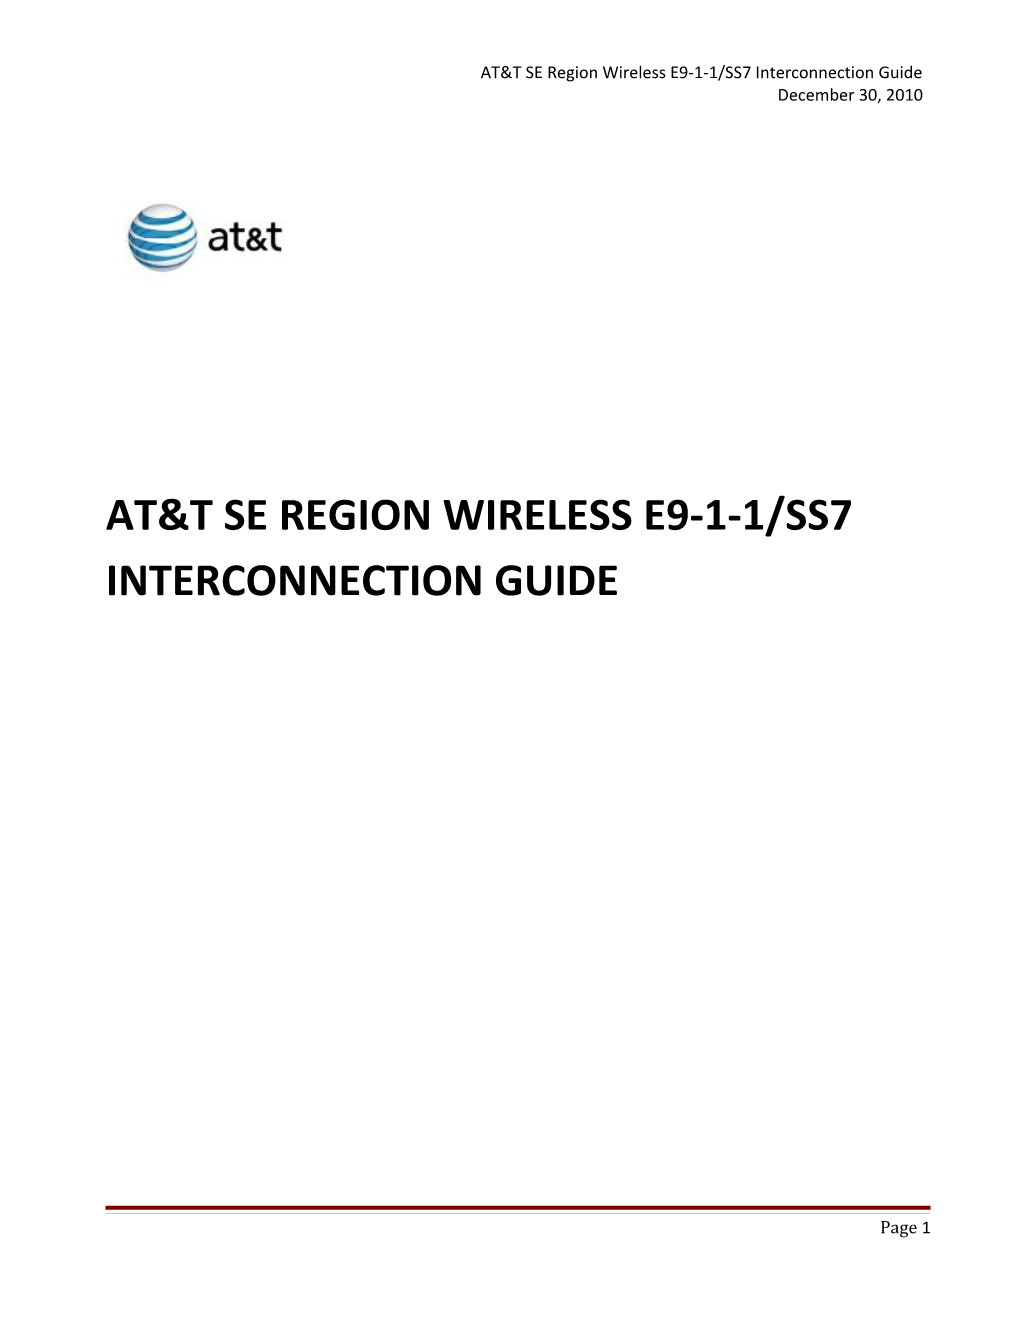 AT&T SE Region Wireless E9-1-1/SS7 Interconnection Guide